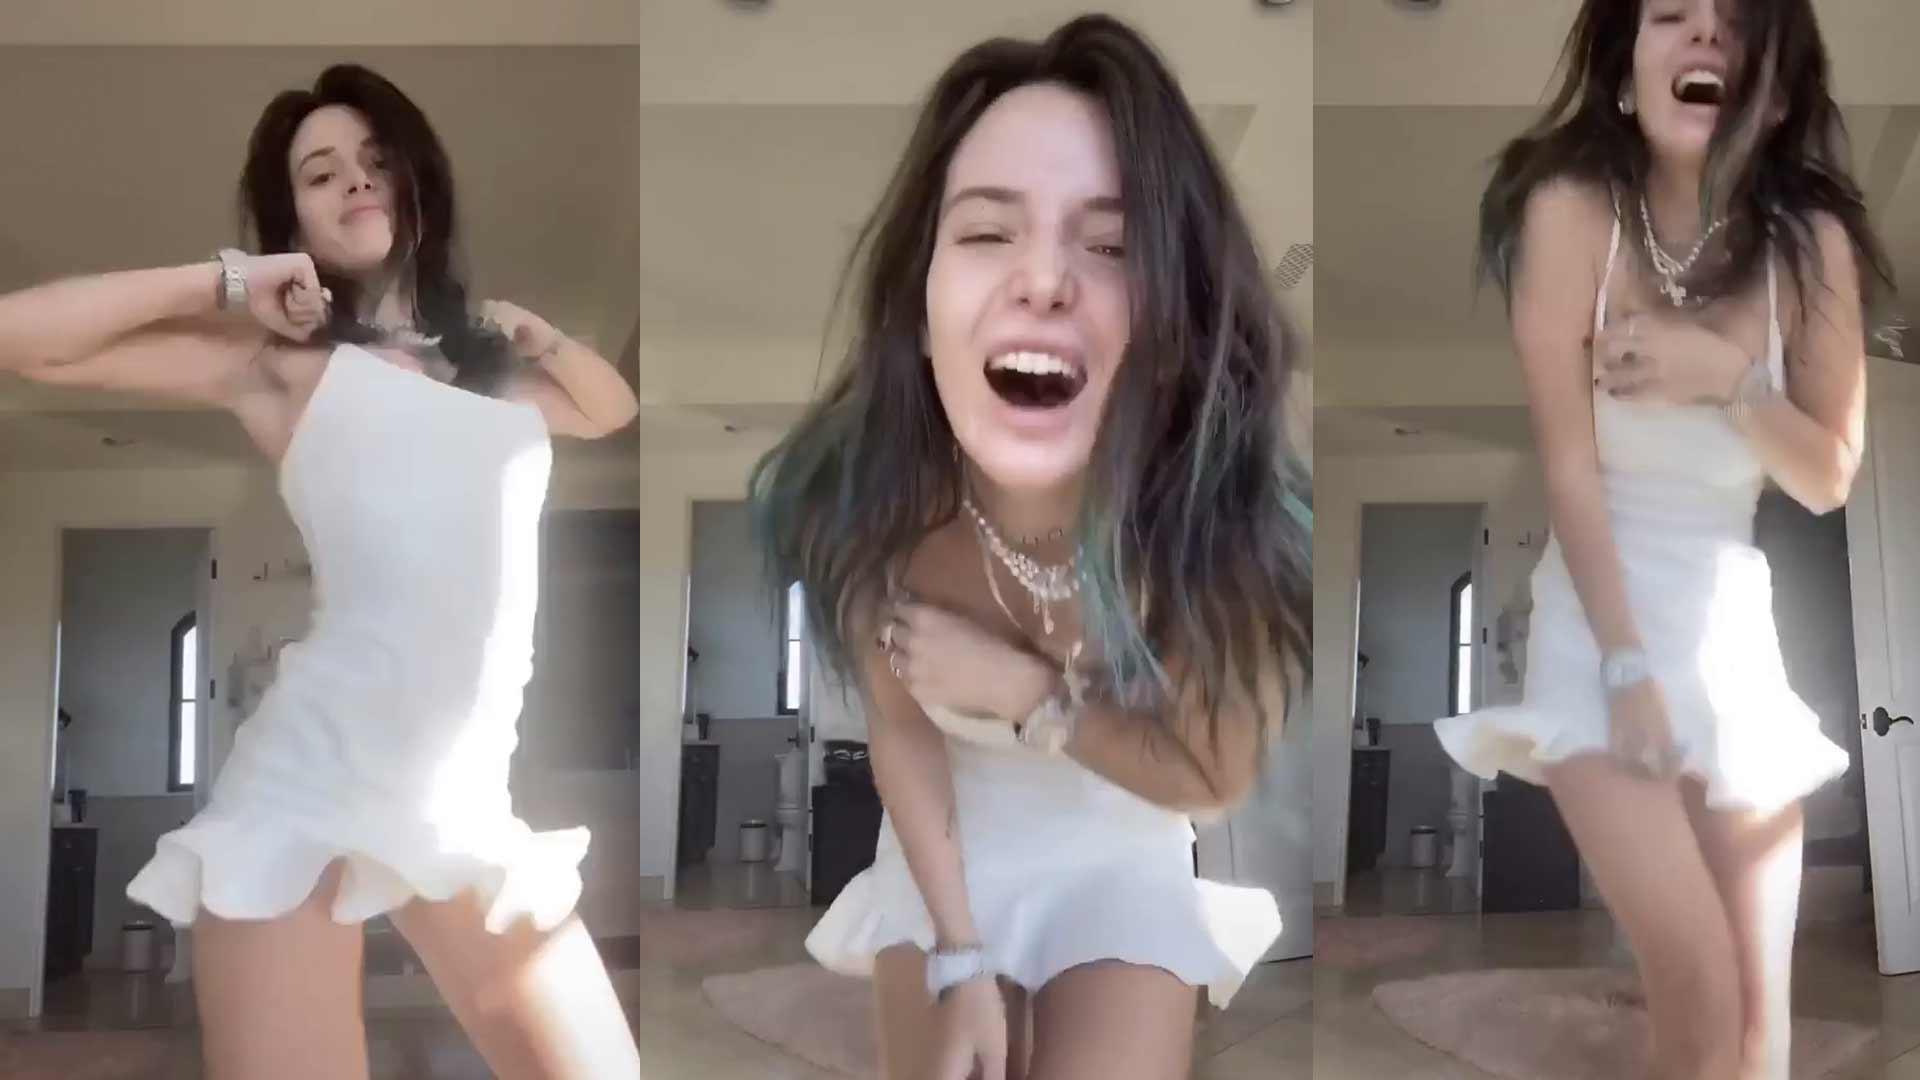 Bella Thorne Makes Fans Smile By Dancing In Short White Dress That Won’t Stay Down